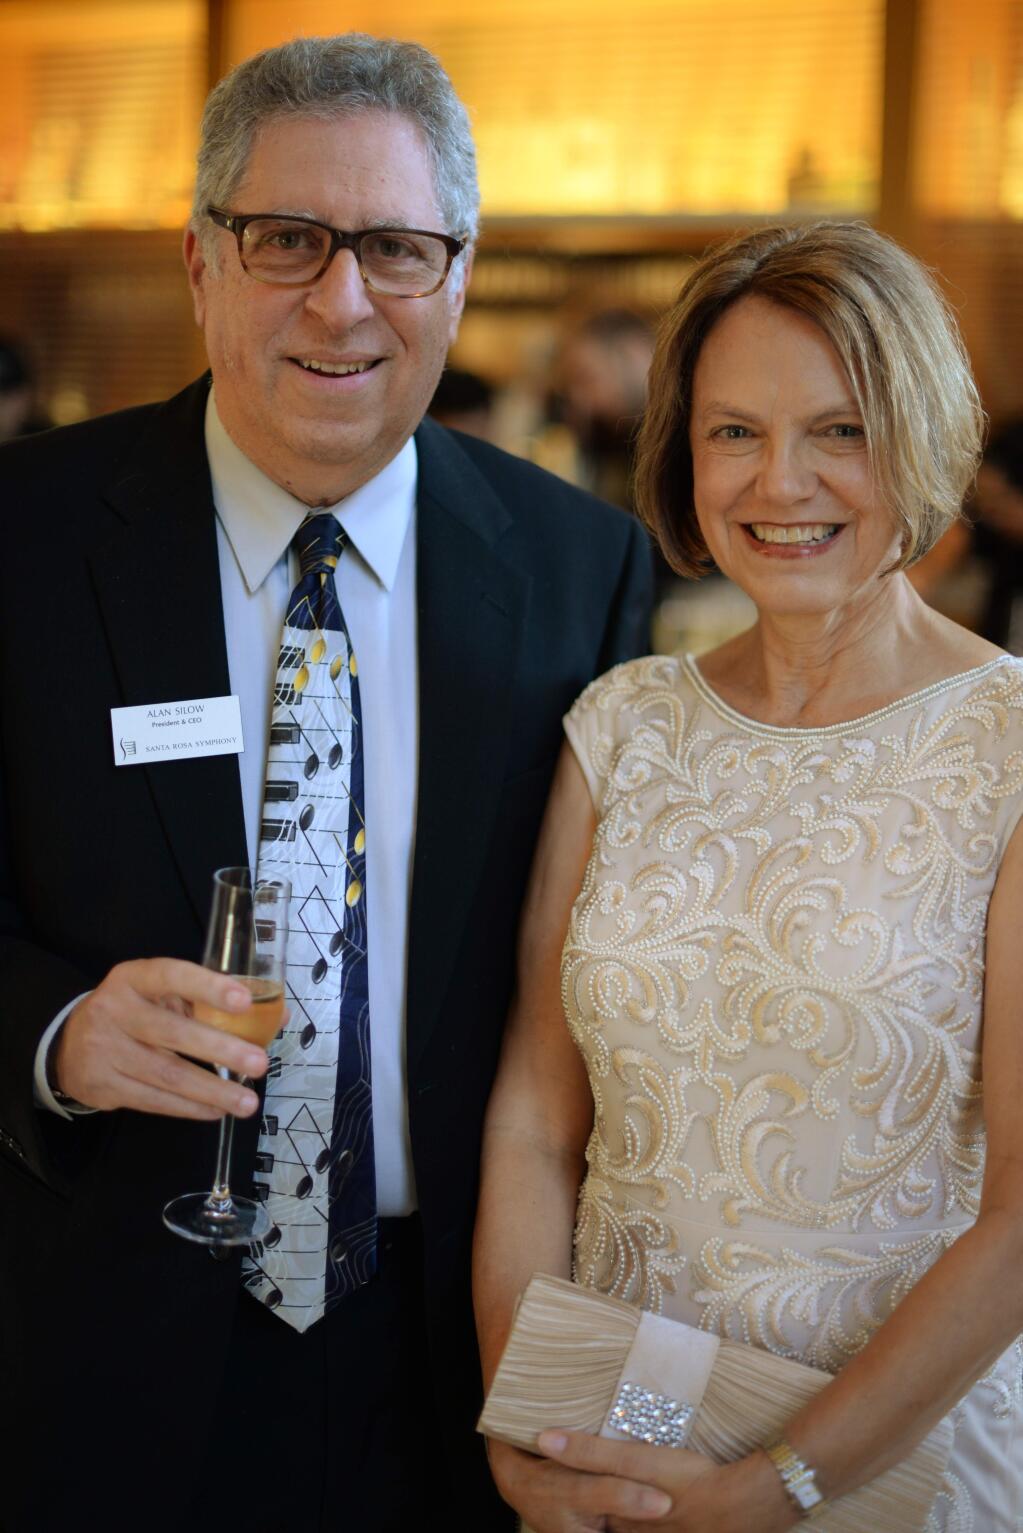 Santa Rosa Symphony President and CEO Alan Silow with Theresa Silow during a celebration for the Santa Rosa Symphony held at the Green Music Center in Rohnert Park, California. October 5, 2018. (Photo: Erik Castro/for The Press Democrat)